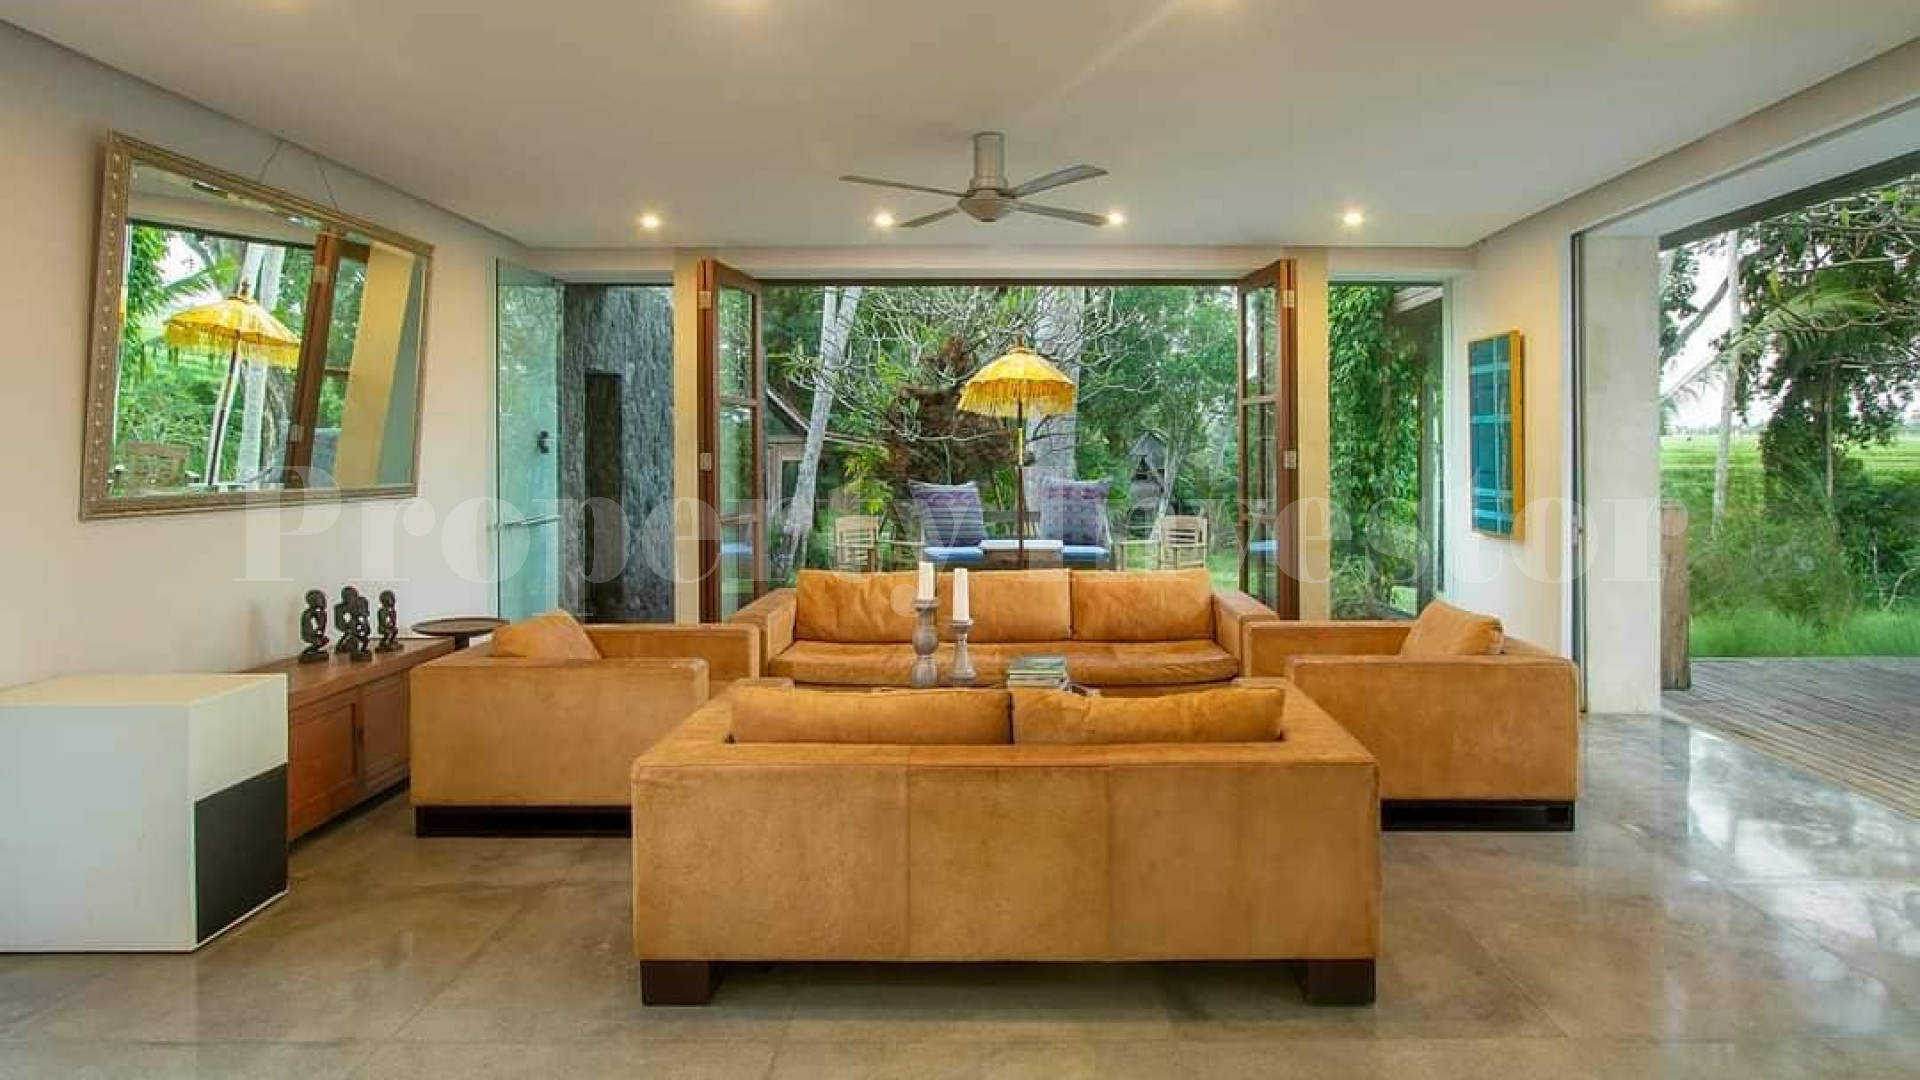 Lush 5 Bedroom Luxury Estate with Beautifully Groomed Gardens for Sale in Seseh Beach, Bali